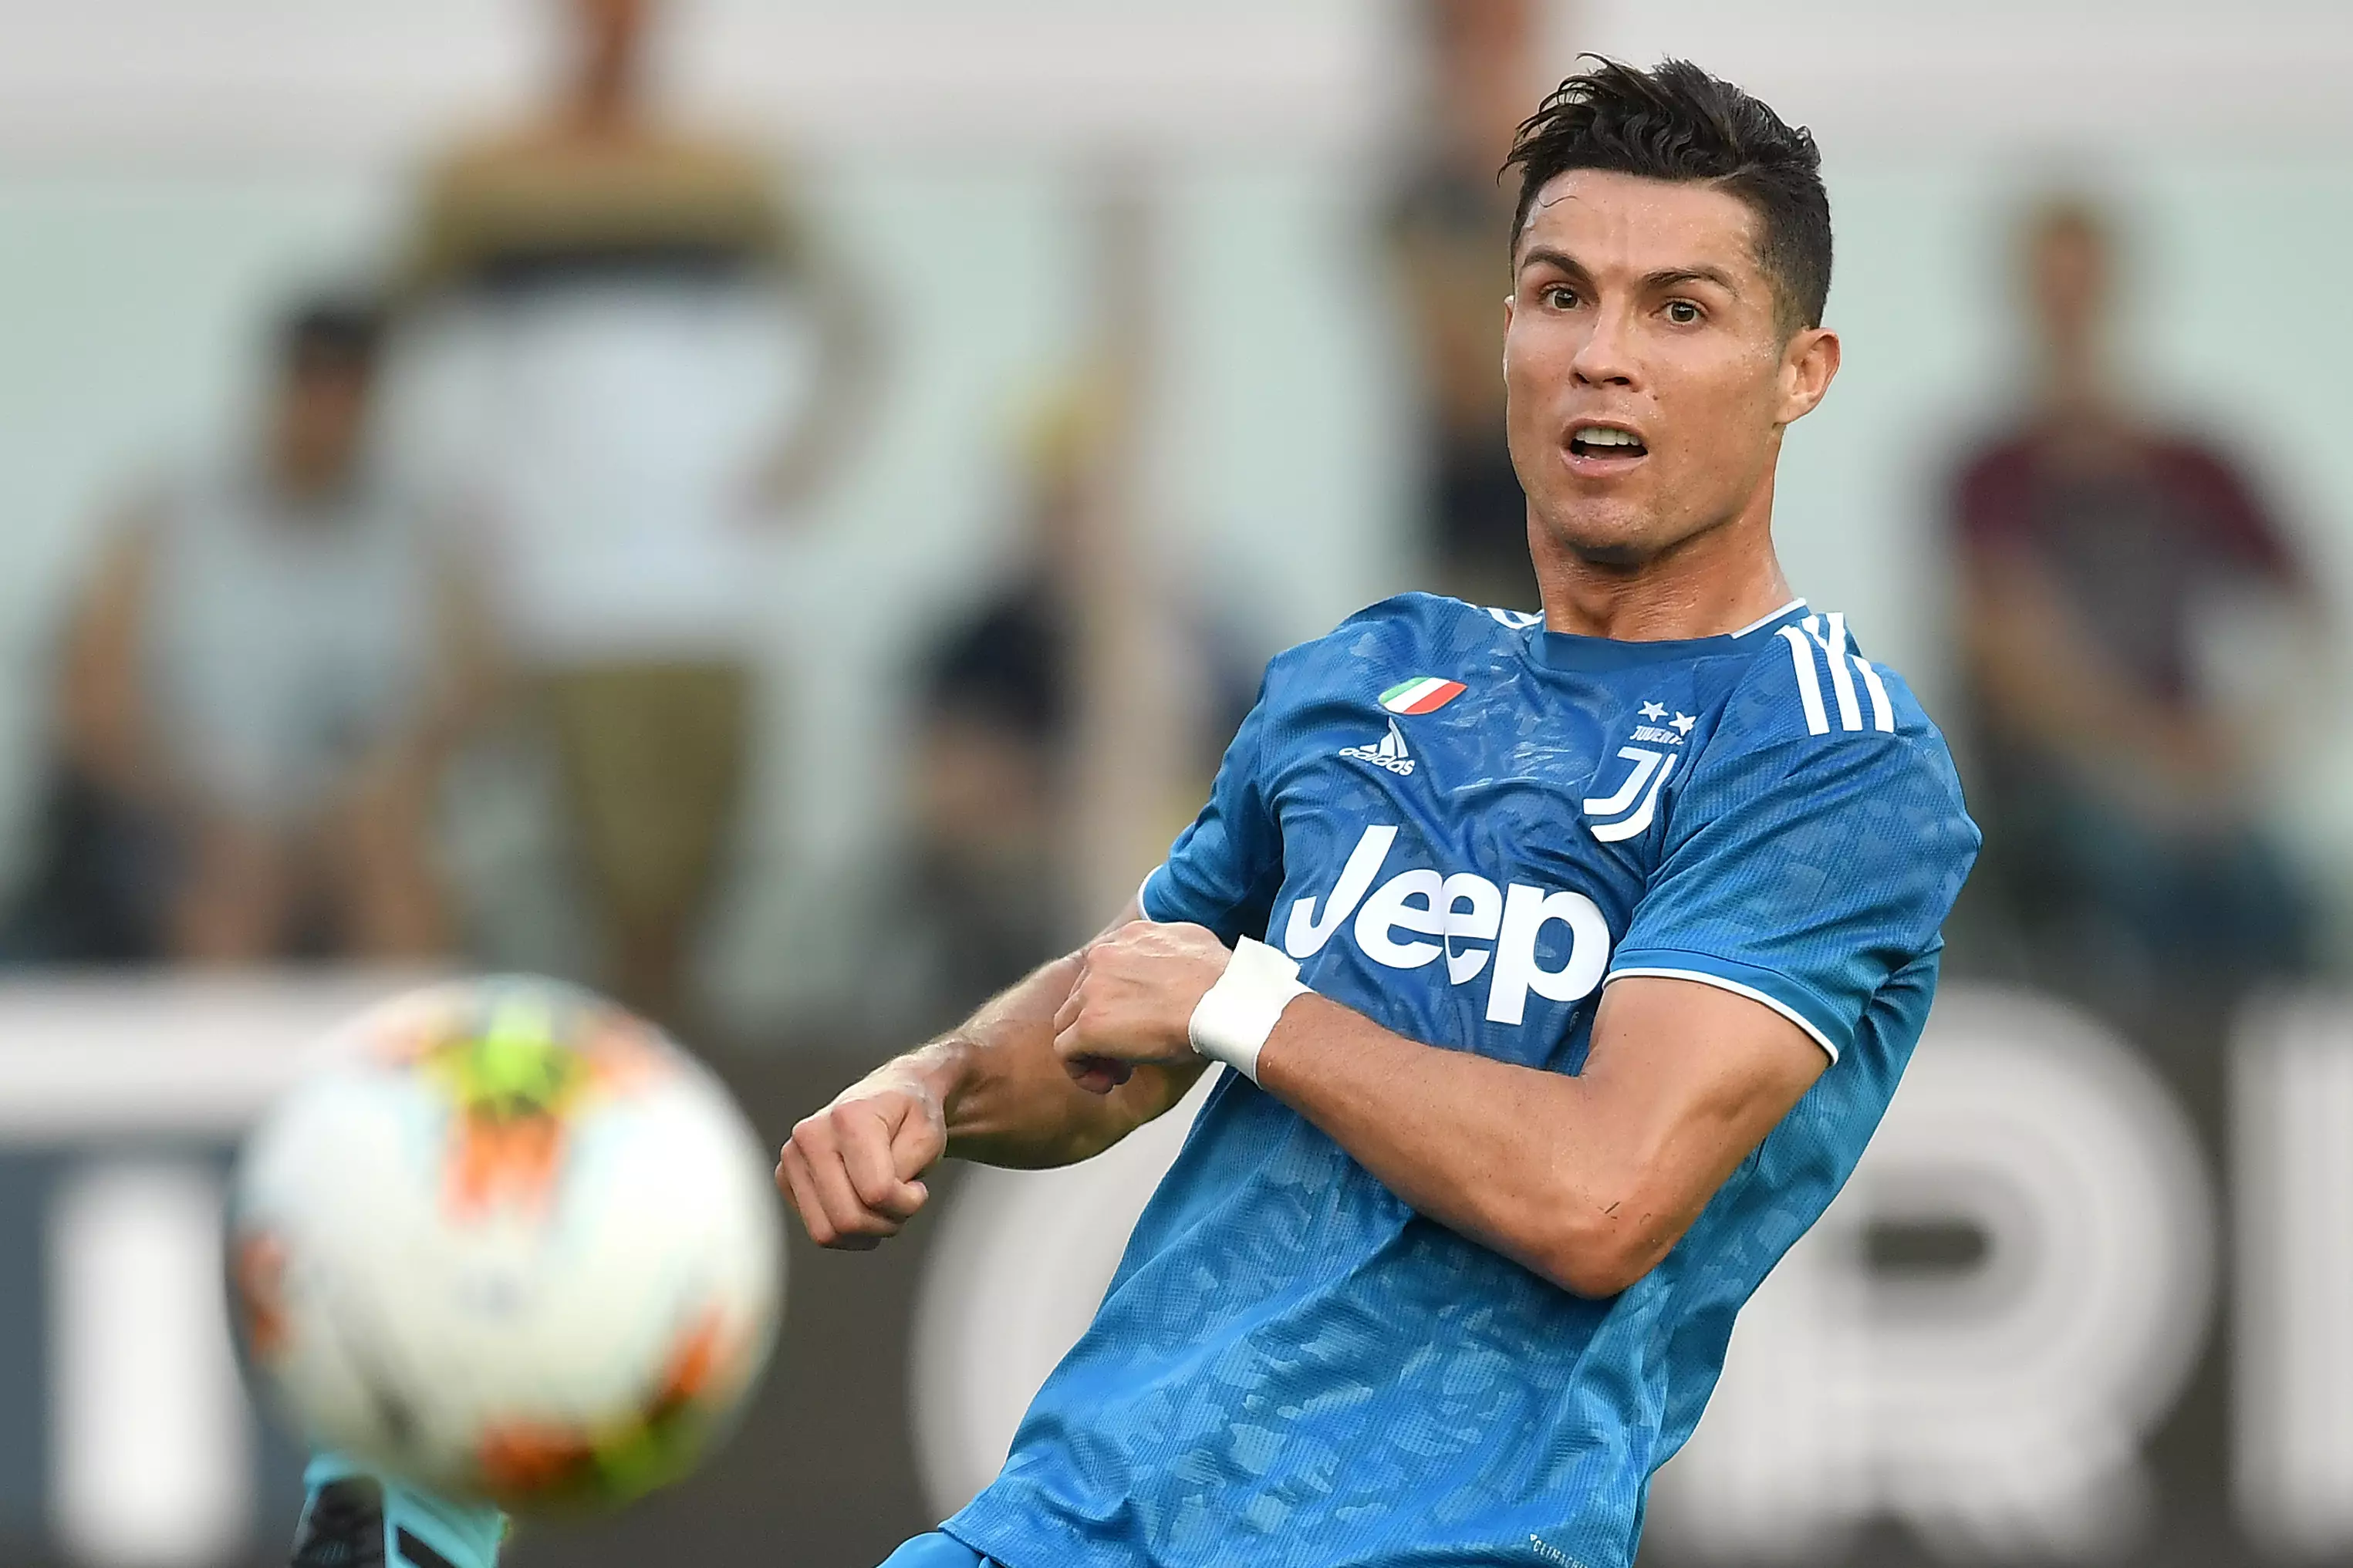 A student translated 'goat' as 'un Ronaldo' in his French exam.